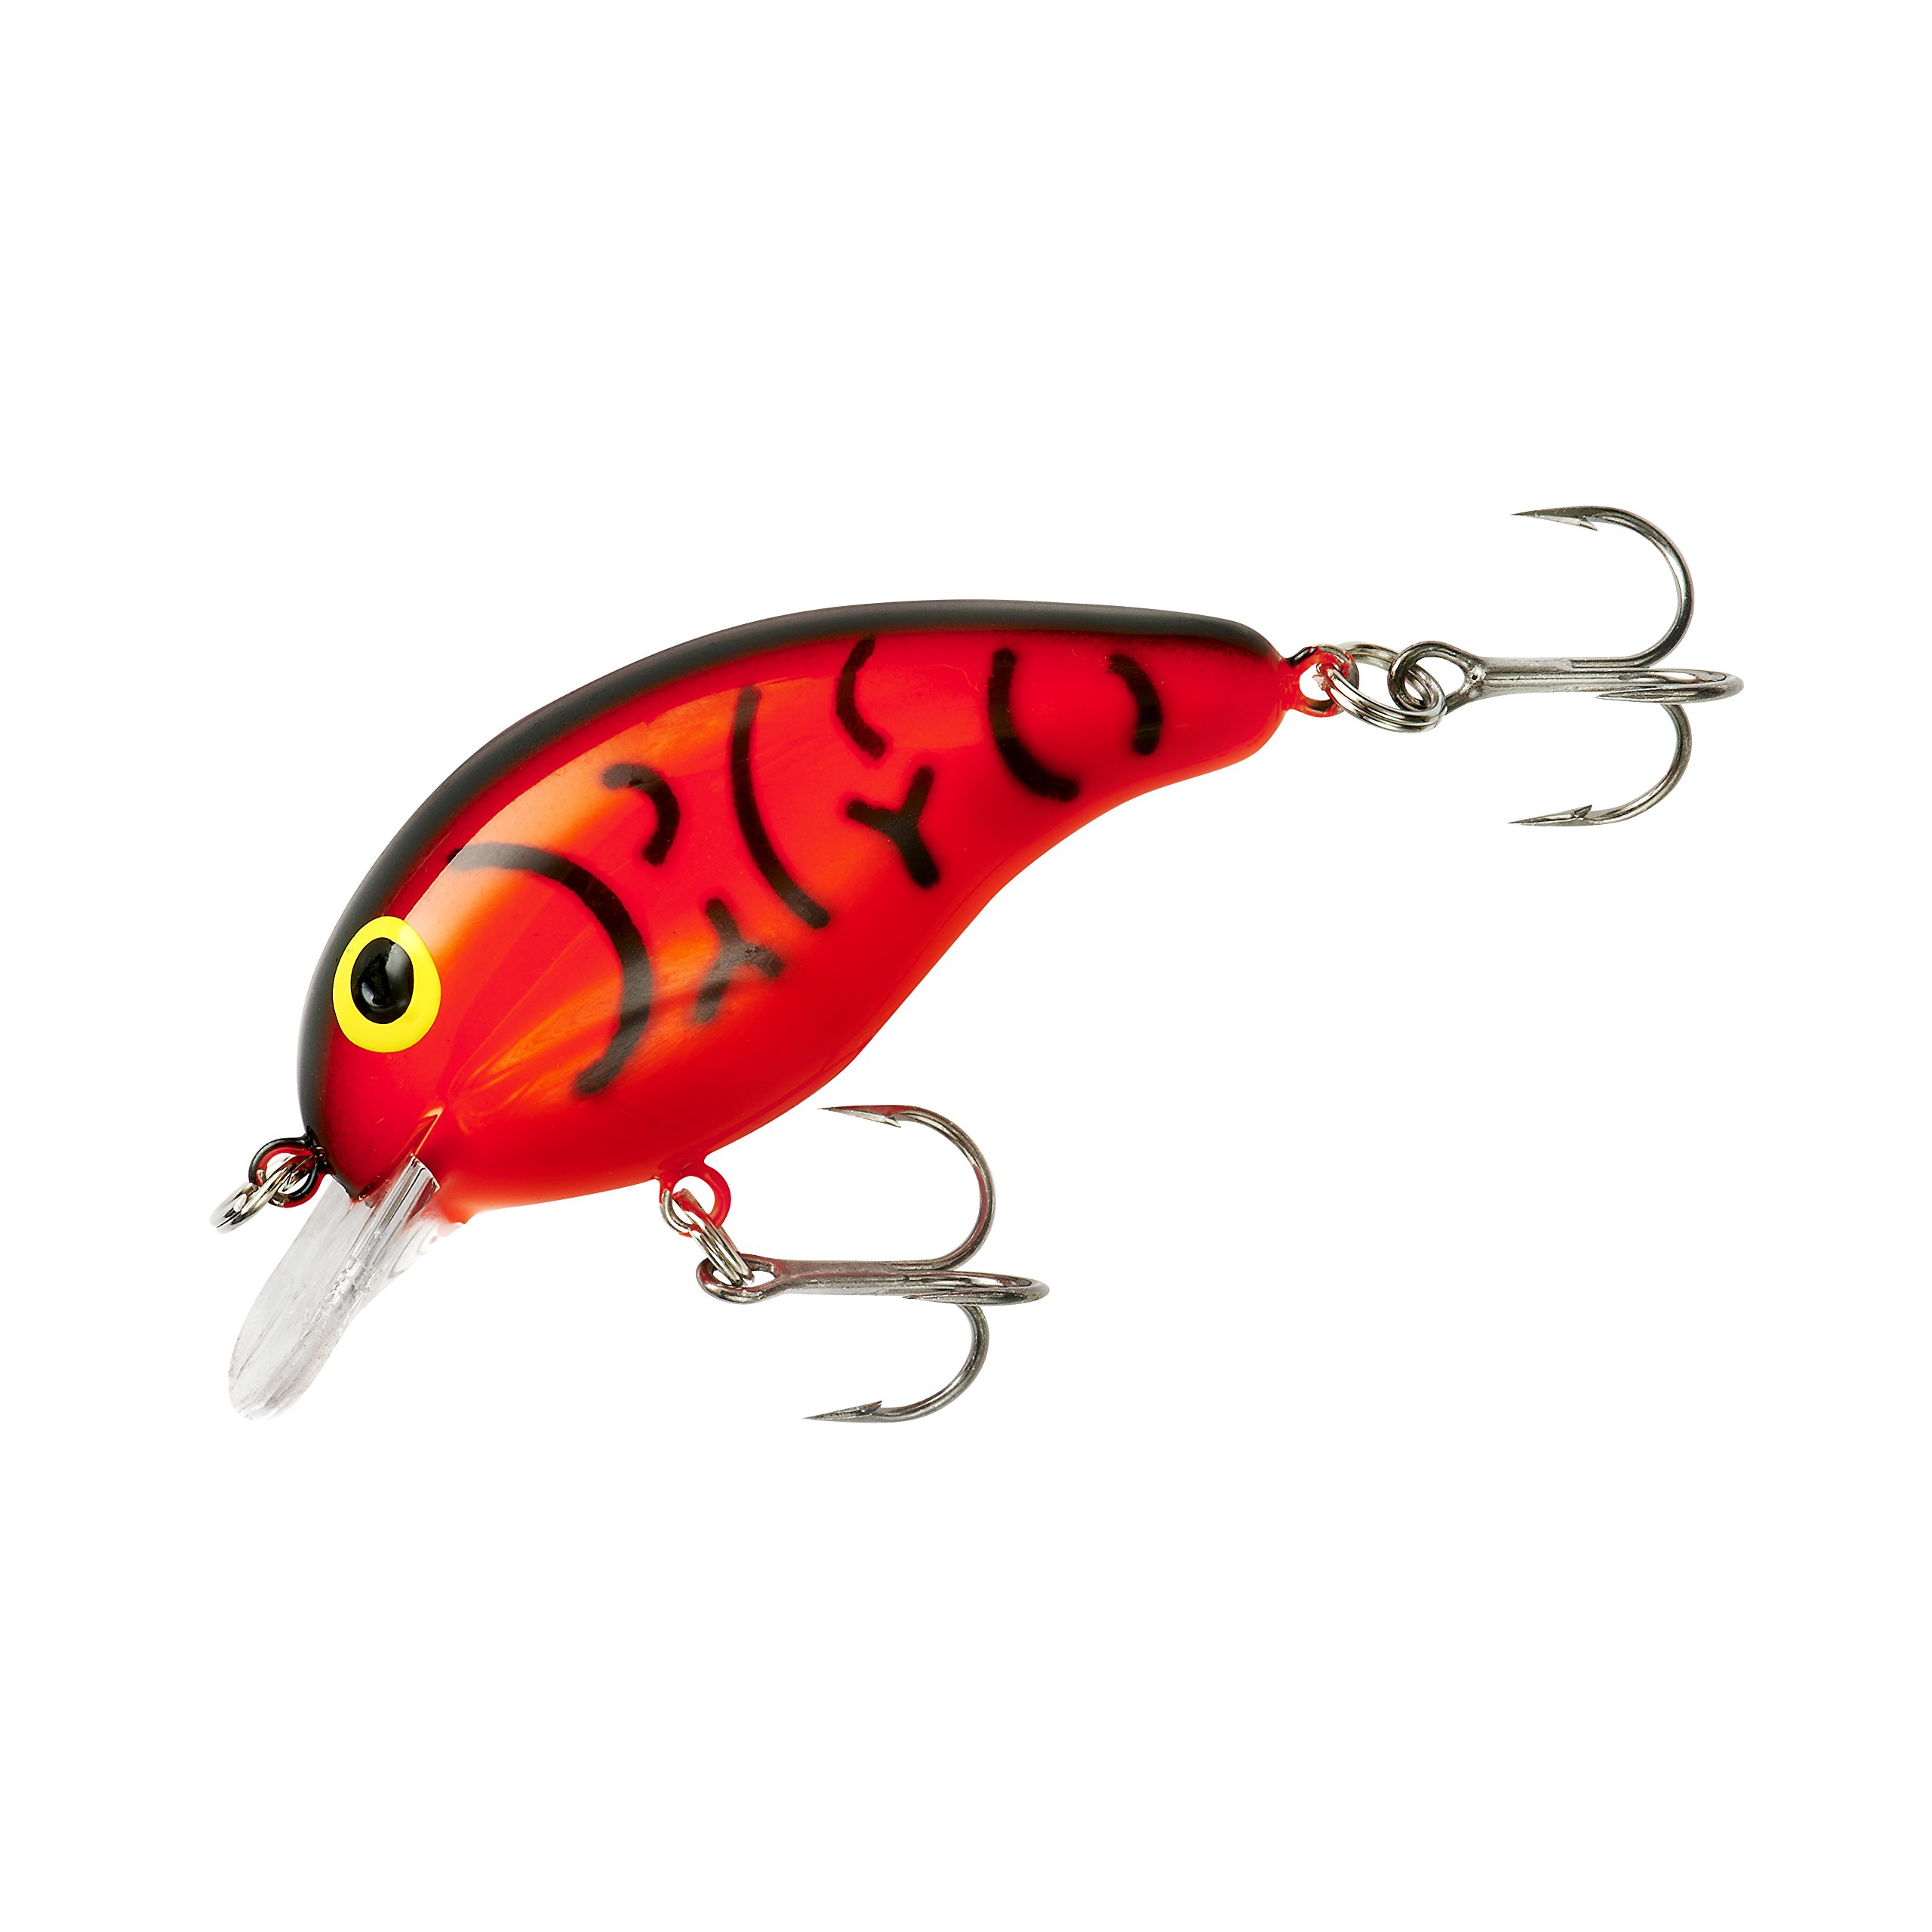 Bandit Series 100 Crankbait Bass Fishing Lures, Dives to 5-feet Deep, 2  Inches, 1/4